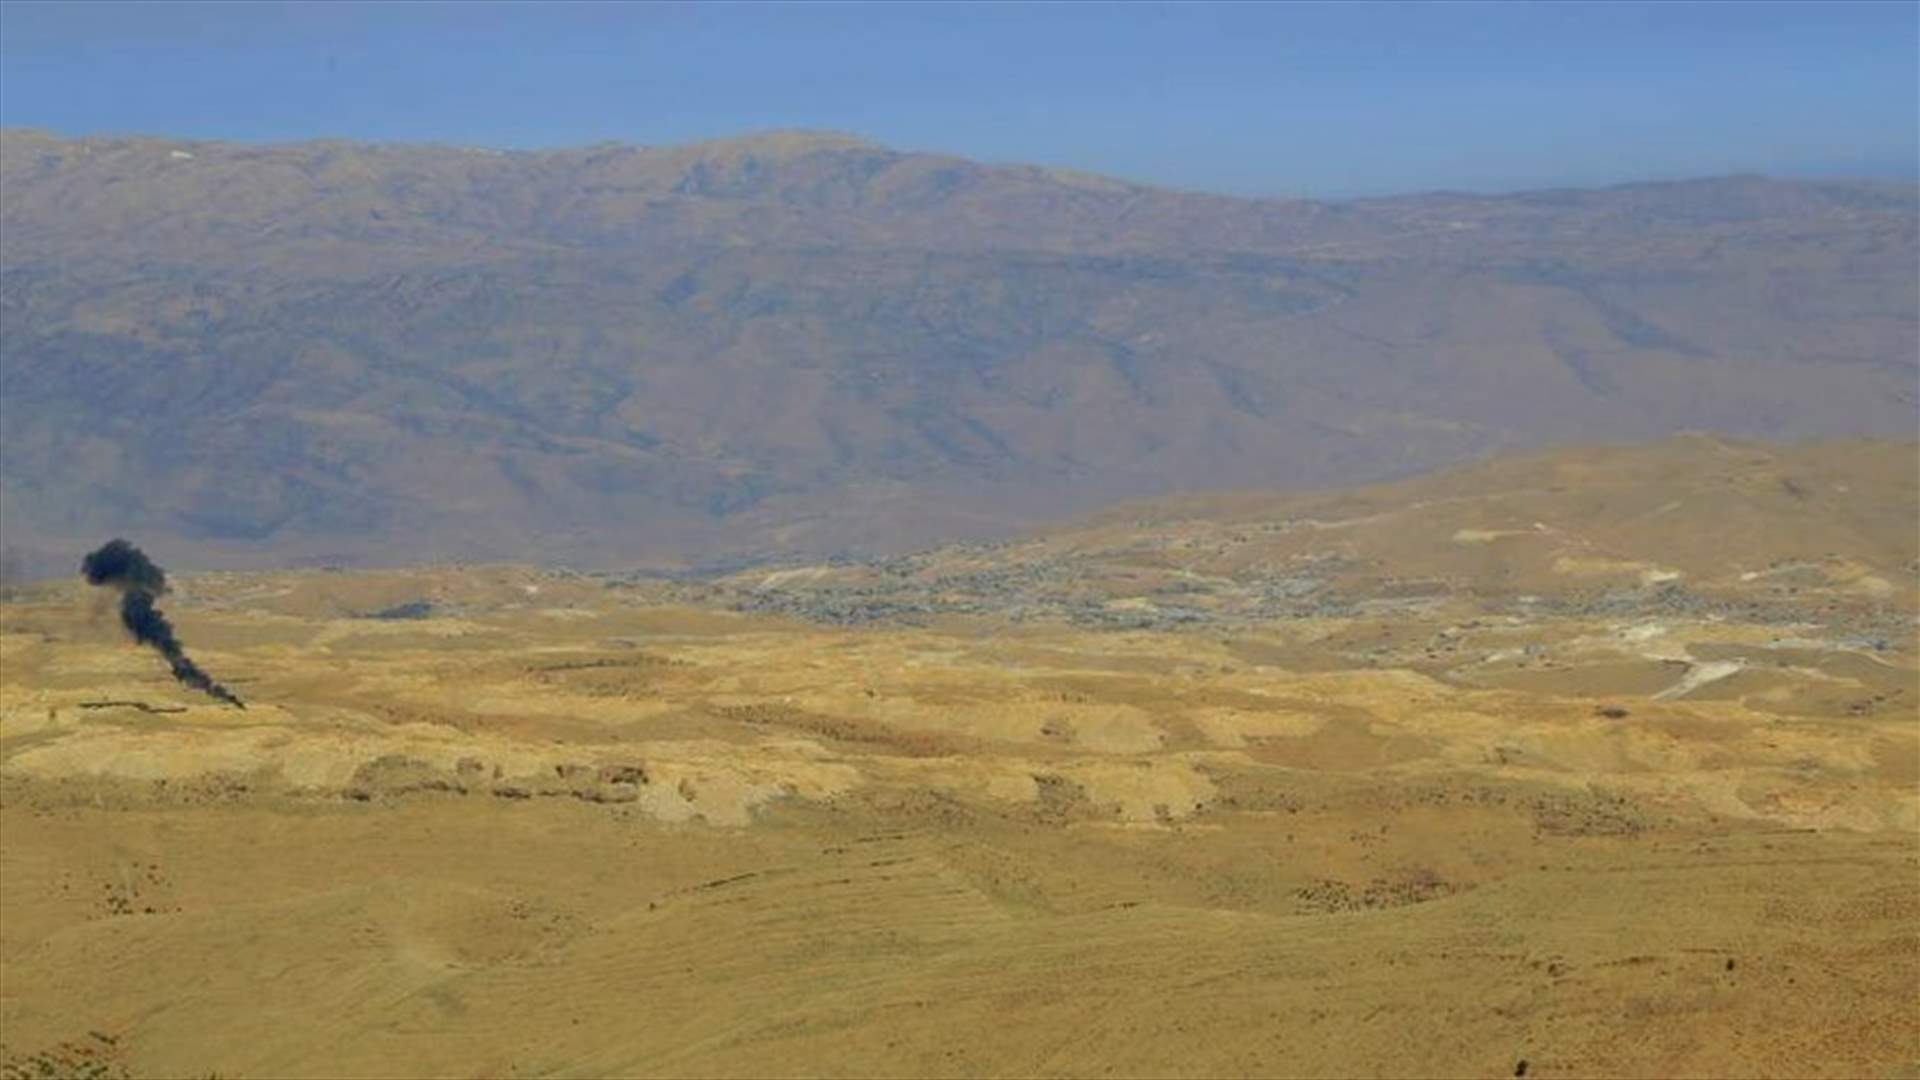 Sixth day of Arsal battle, will the negotiations be successful&#63;